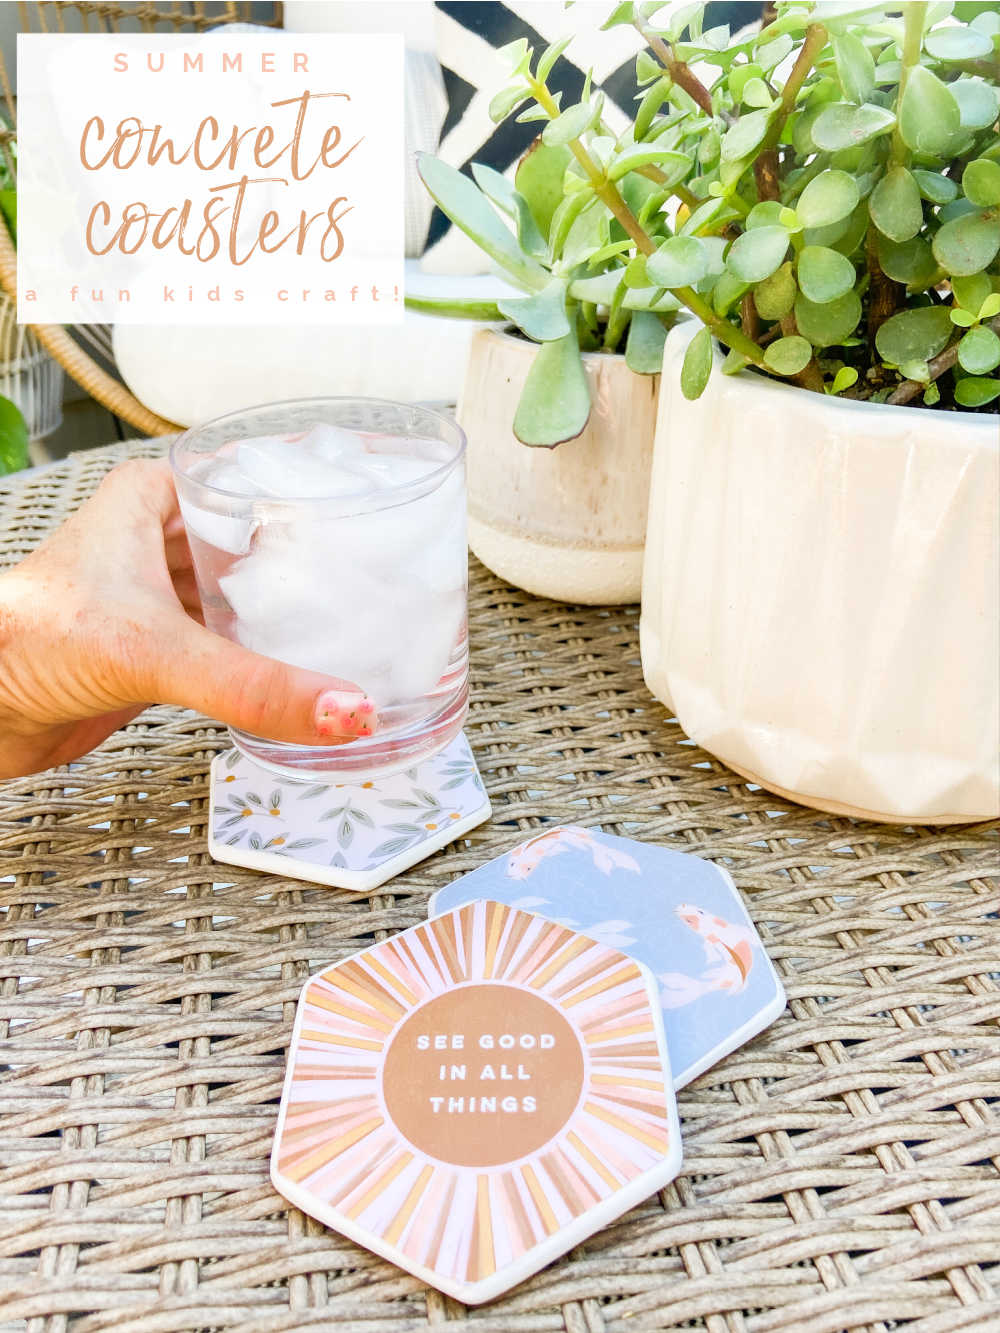 DIY Concrete Decoupage Coasters is a fun kids craft to make this summer! 